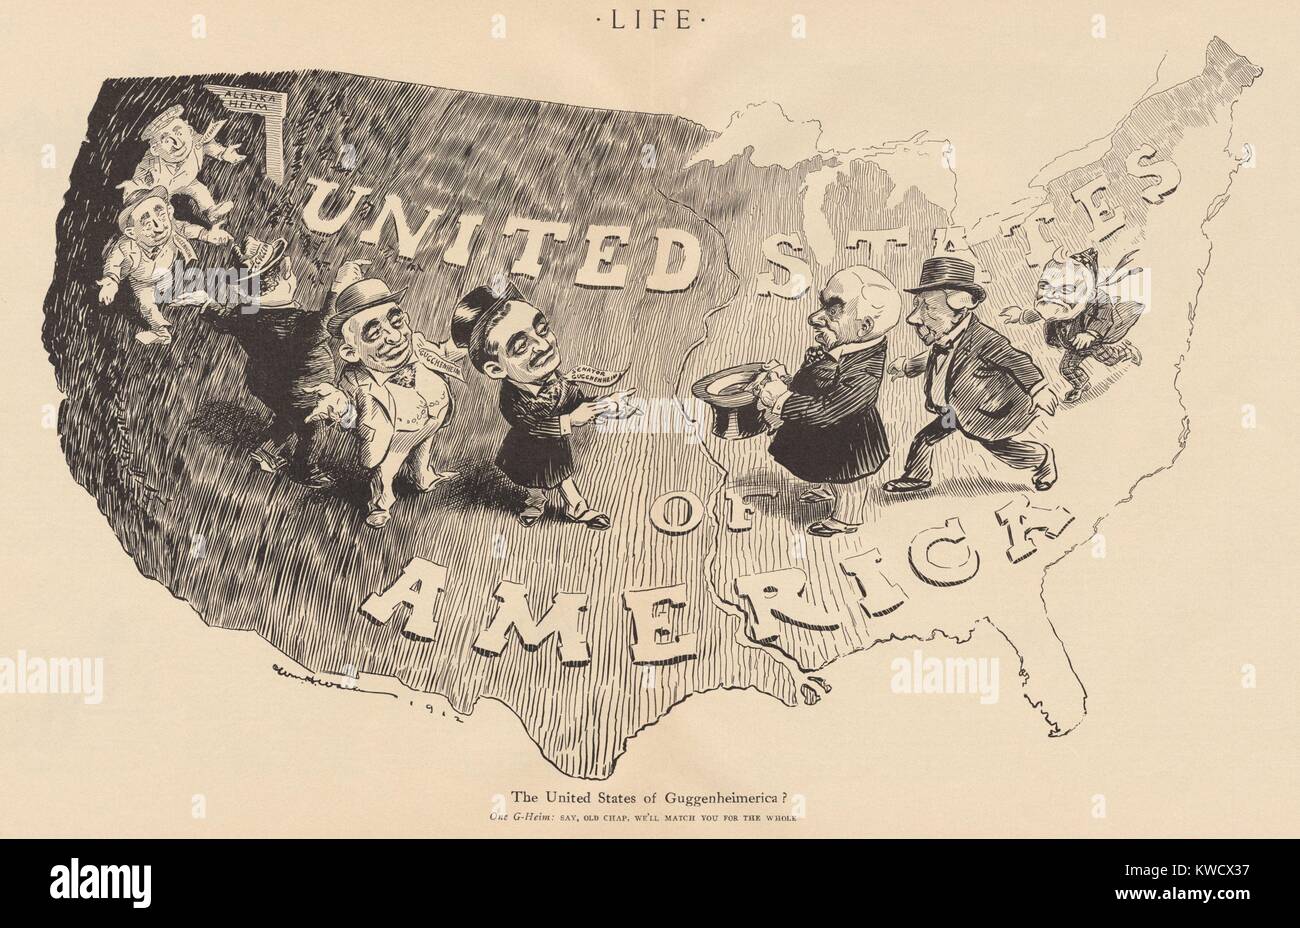 UNITED STATES OF GUGGENHEIMERICA? Cartoon by Willard H. Walker satirizes Interior Secretary Ballingers lease of coal land in Alaska to the mining industrialist family, the Guggenheims. On left are the Guggenheim family. On right are J.P. Morgan, Rockefeller, and Andrew Carnegie, lining up for their share (BSLOC 2017 2 127) Stock Photo